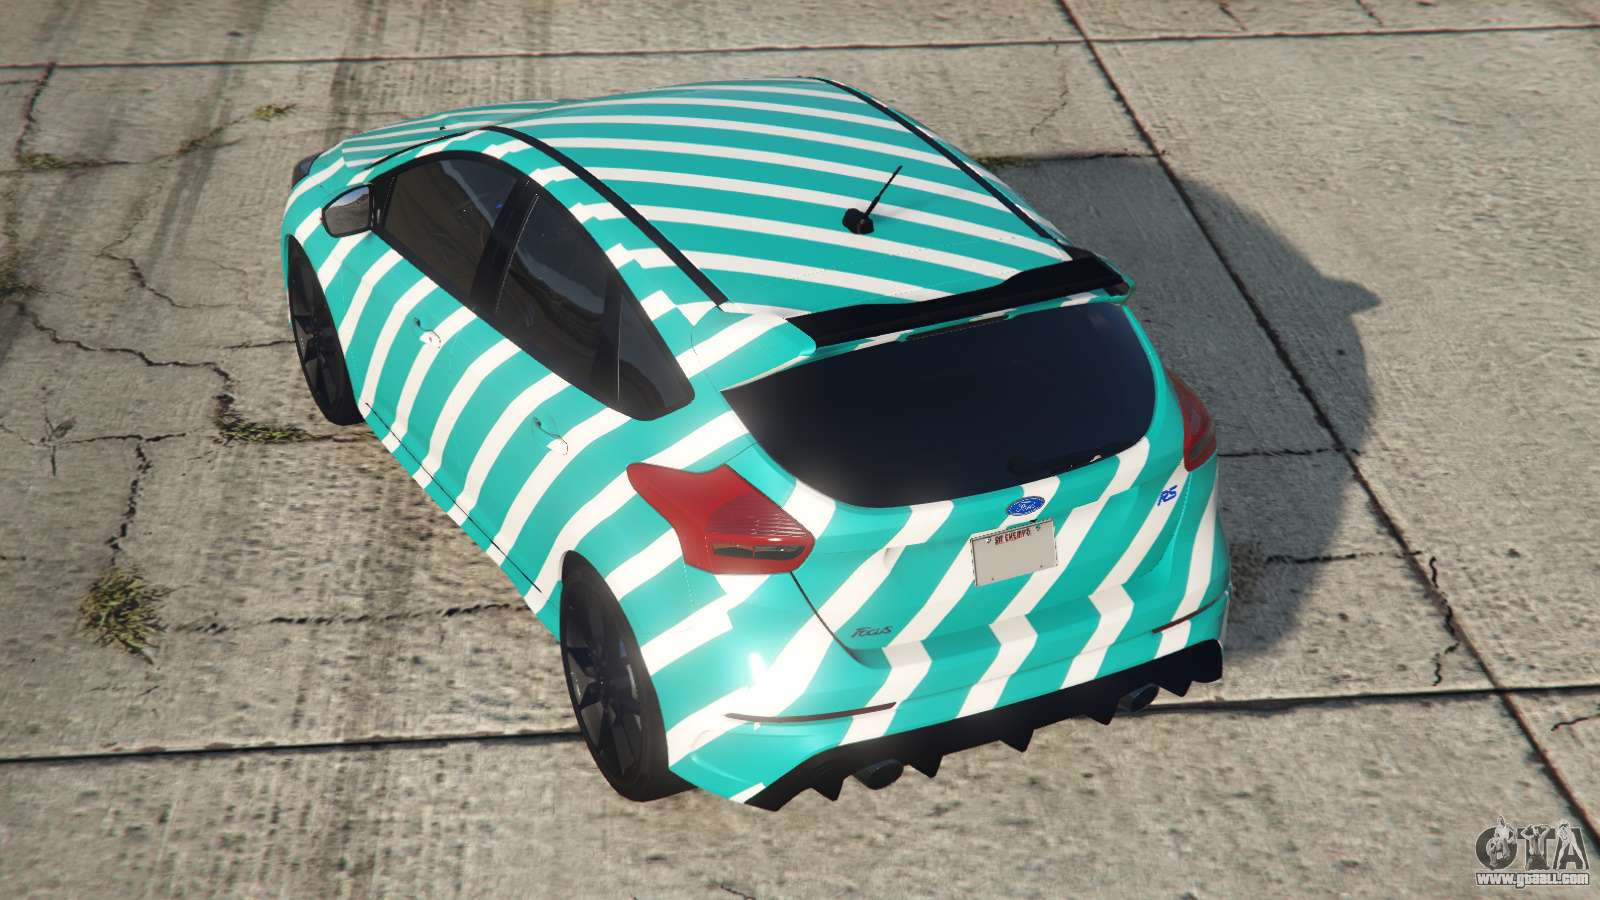 Ford Focus RS Bright Turquoise for GTA 5